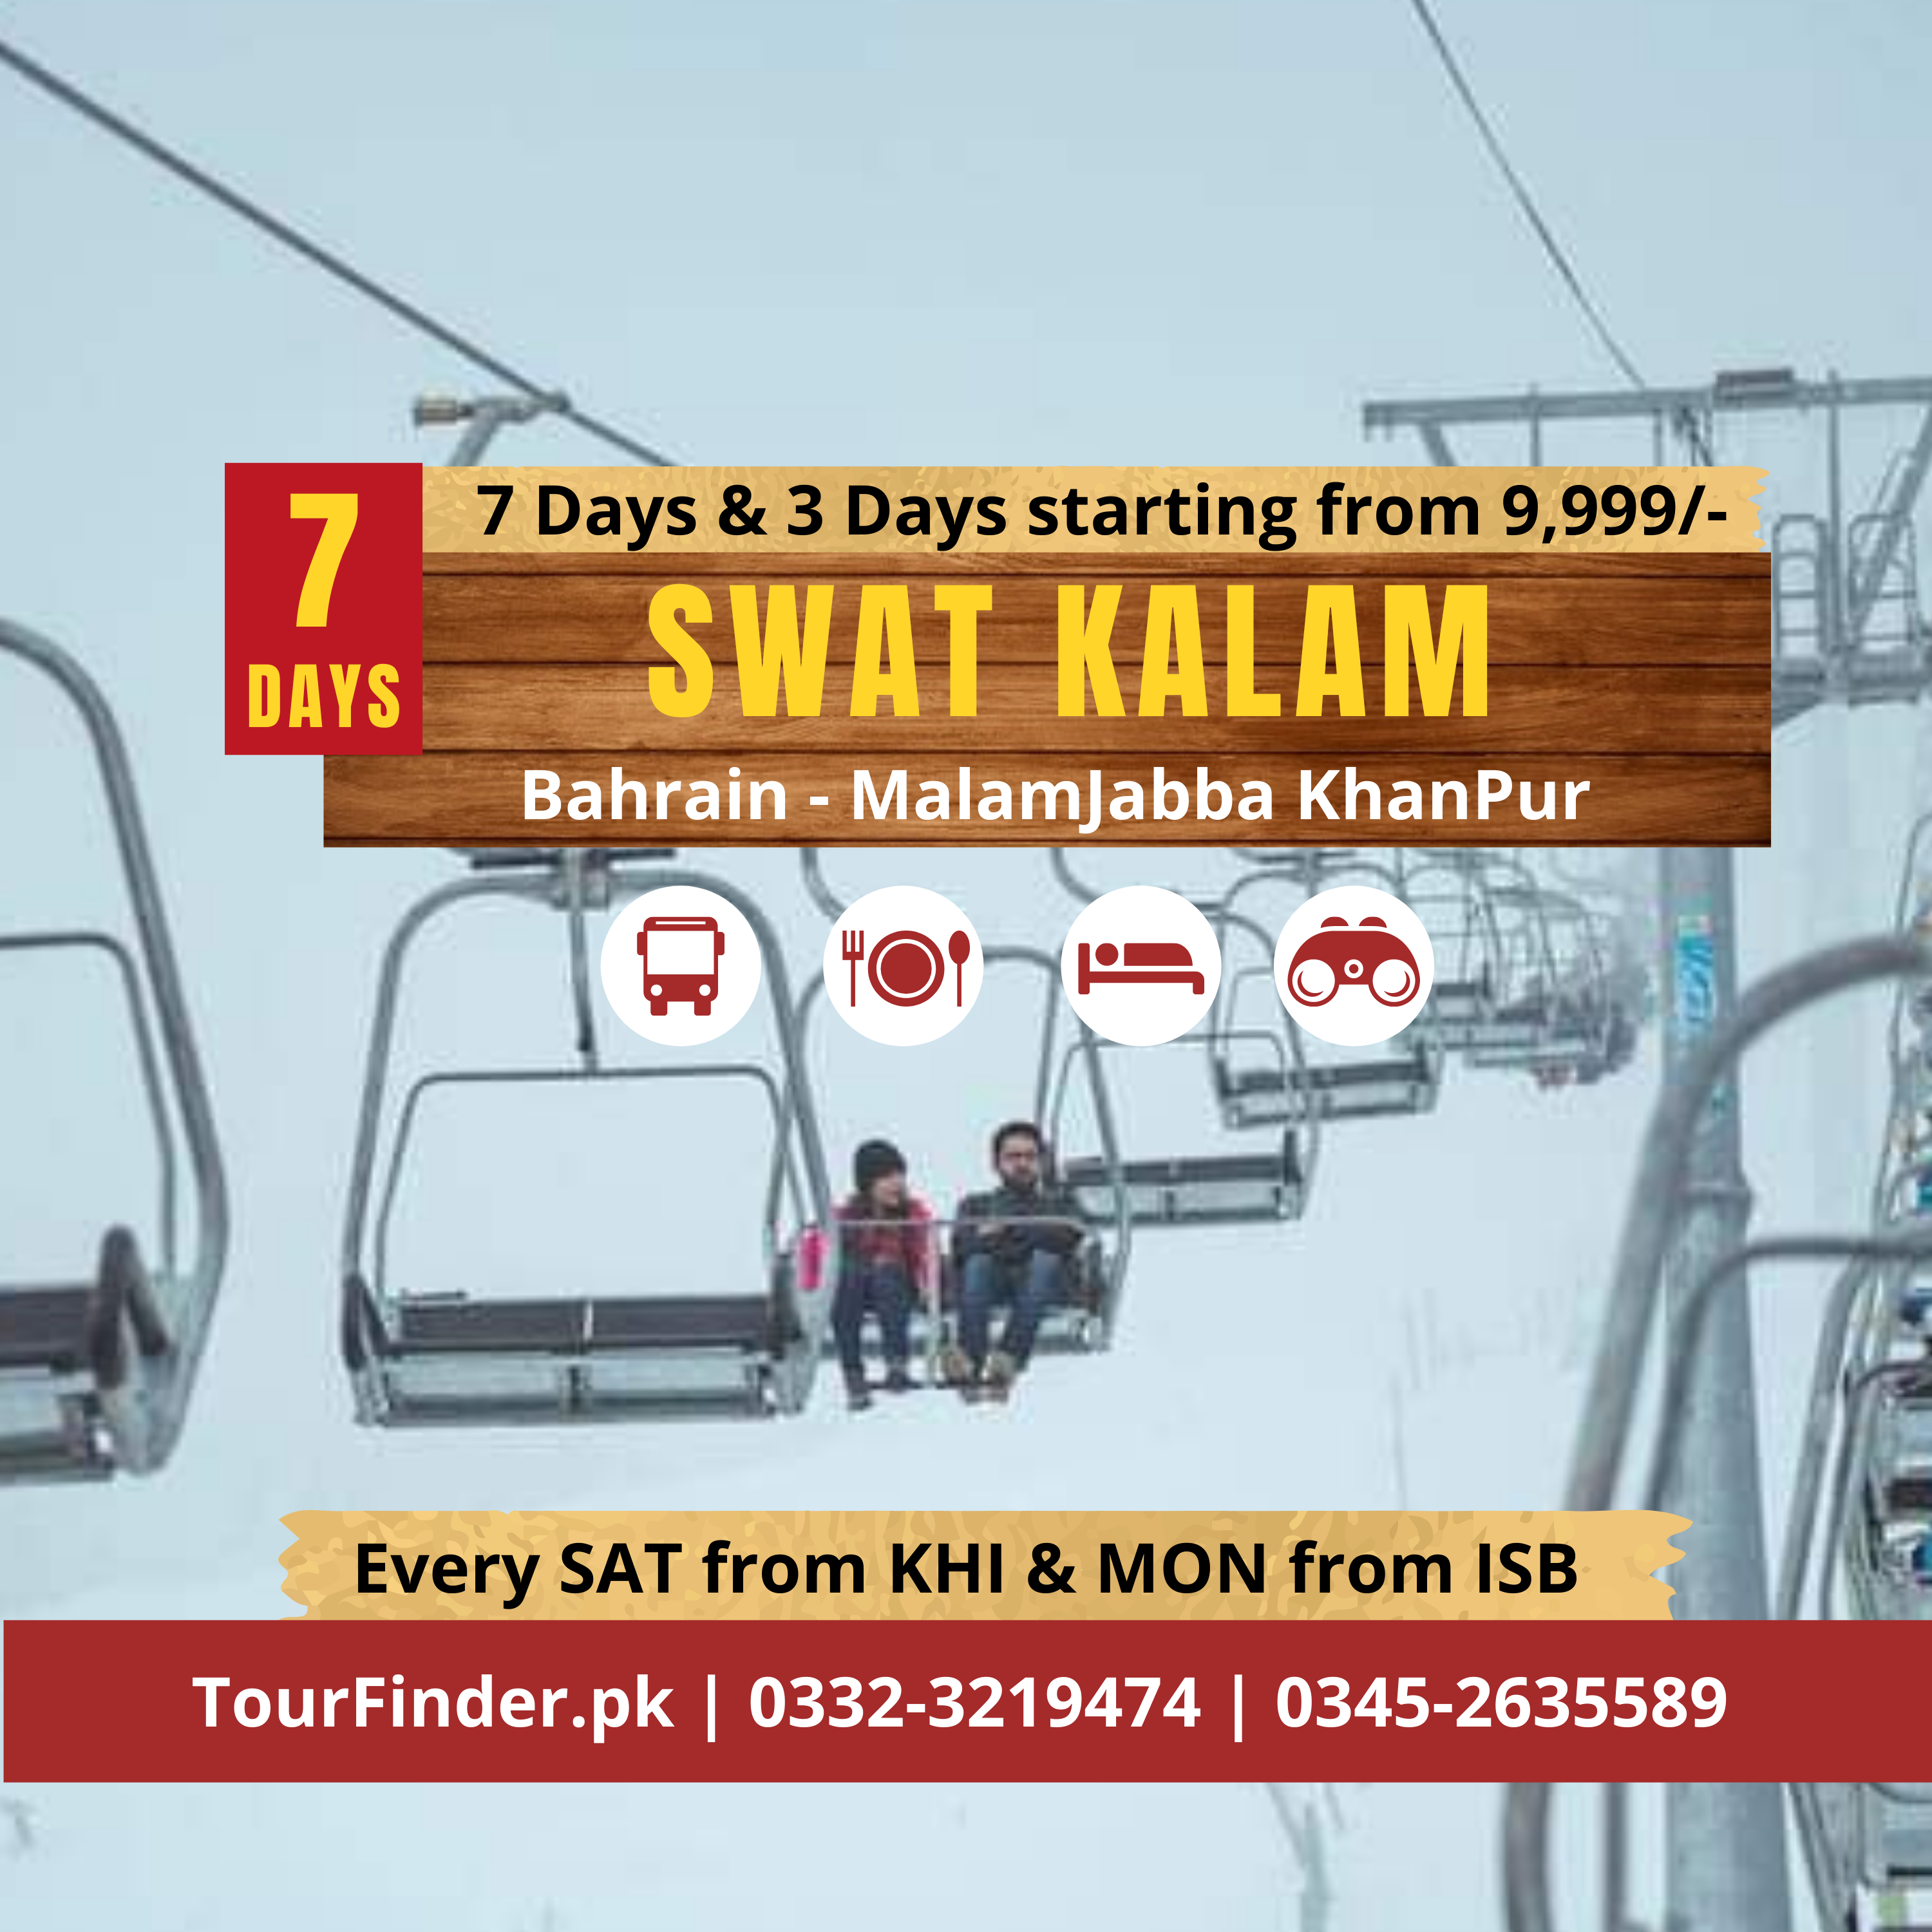 07 days trip to Swat Kalam MalamJabba Bahrain (Departure Every Saturday from KHI)